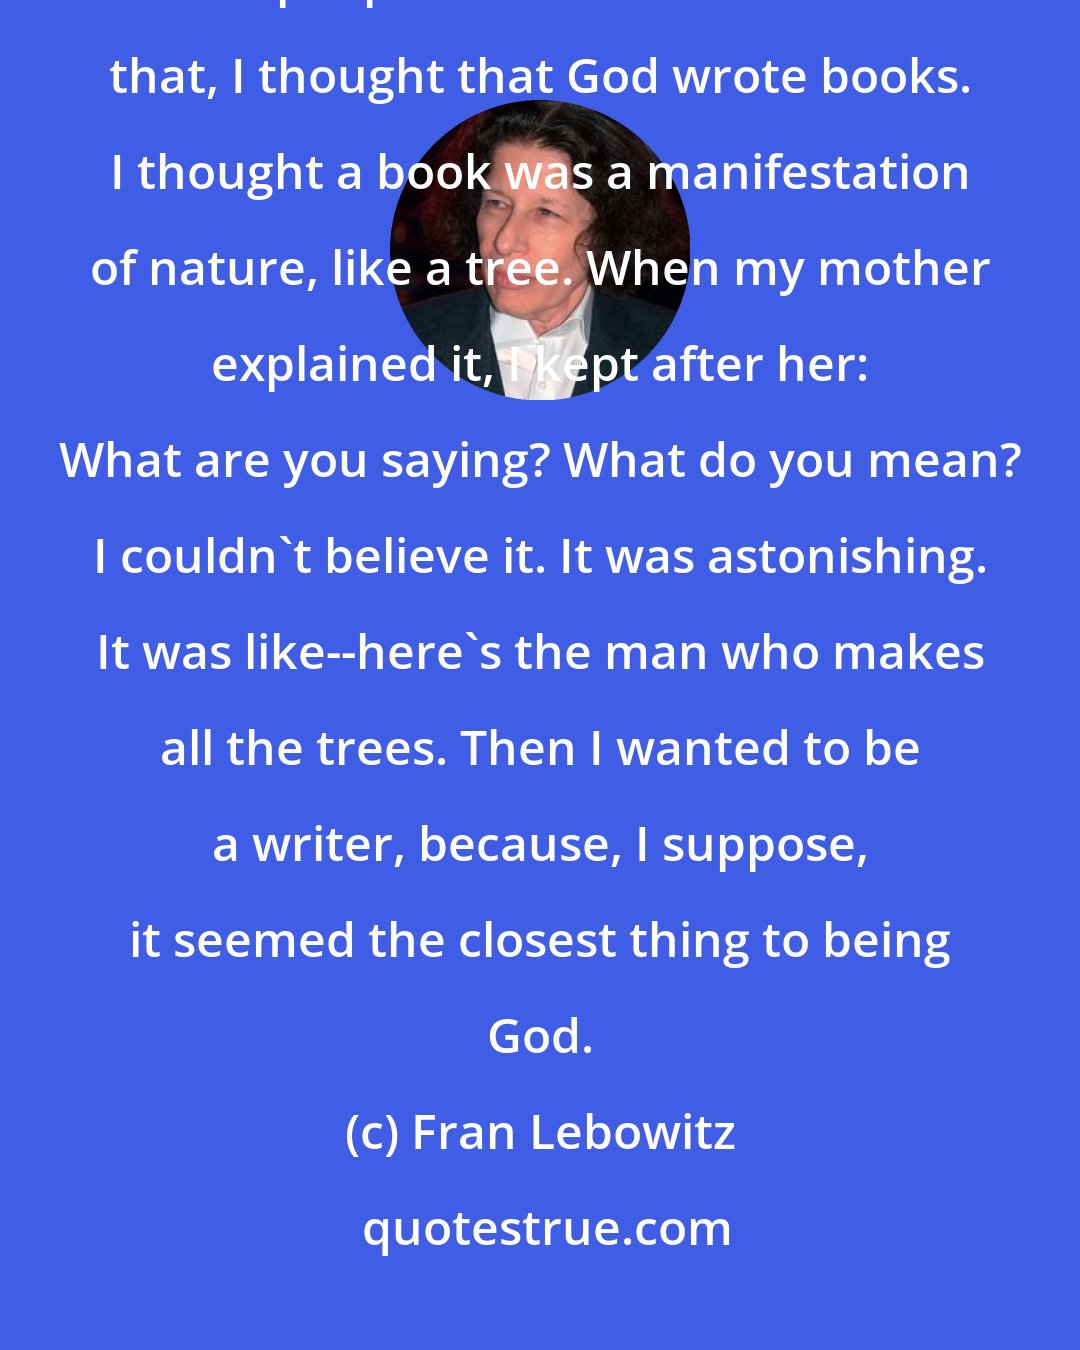 Fran Lebowitz: When I was very little, say five or six, I became aware of the fact that people wrote books. Before that, I thought that God wrote books. I thought a book was a manifestation of nature, like a tree. When my mother explained it, I kept after her: What are you saying? What do you mean? I couldn't believe it. It was astonishing. It was like--here's the man who makes all the trees. Then I wanted to be a writer, because, I suppose, it seemed the closest thing to being God.